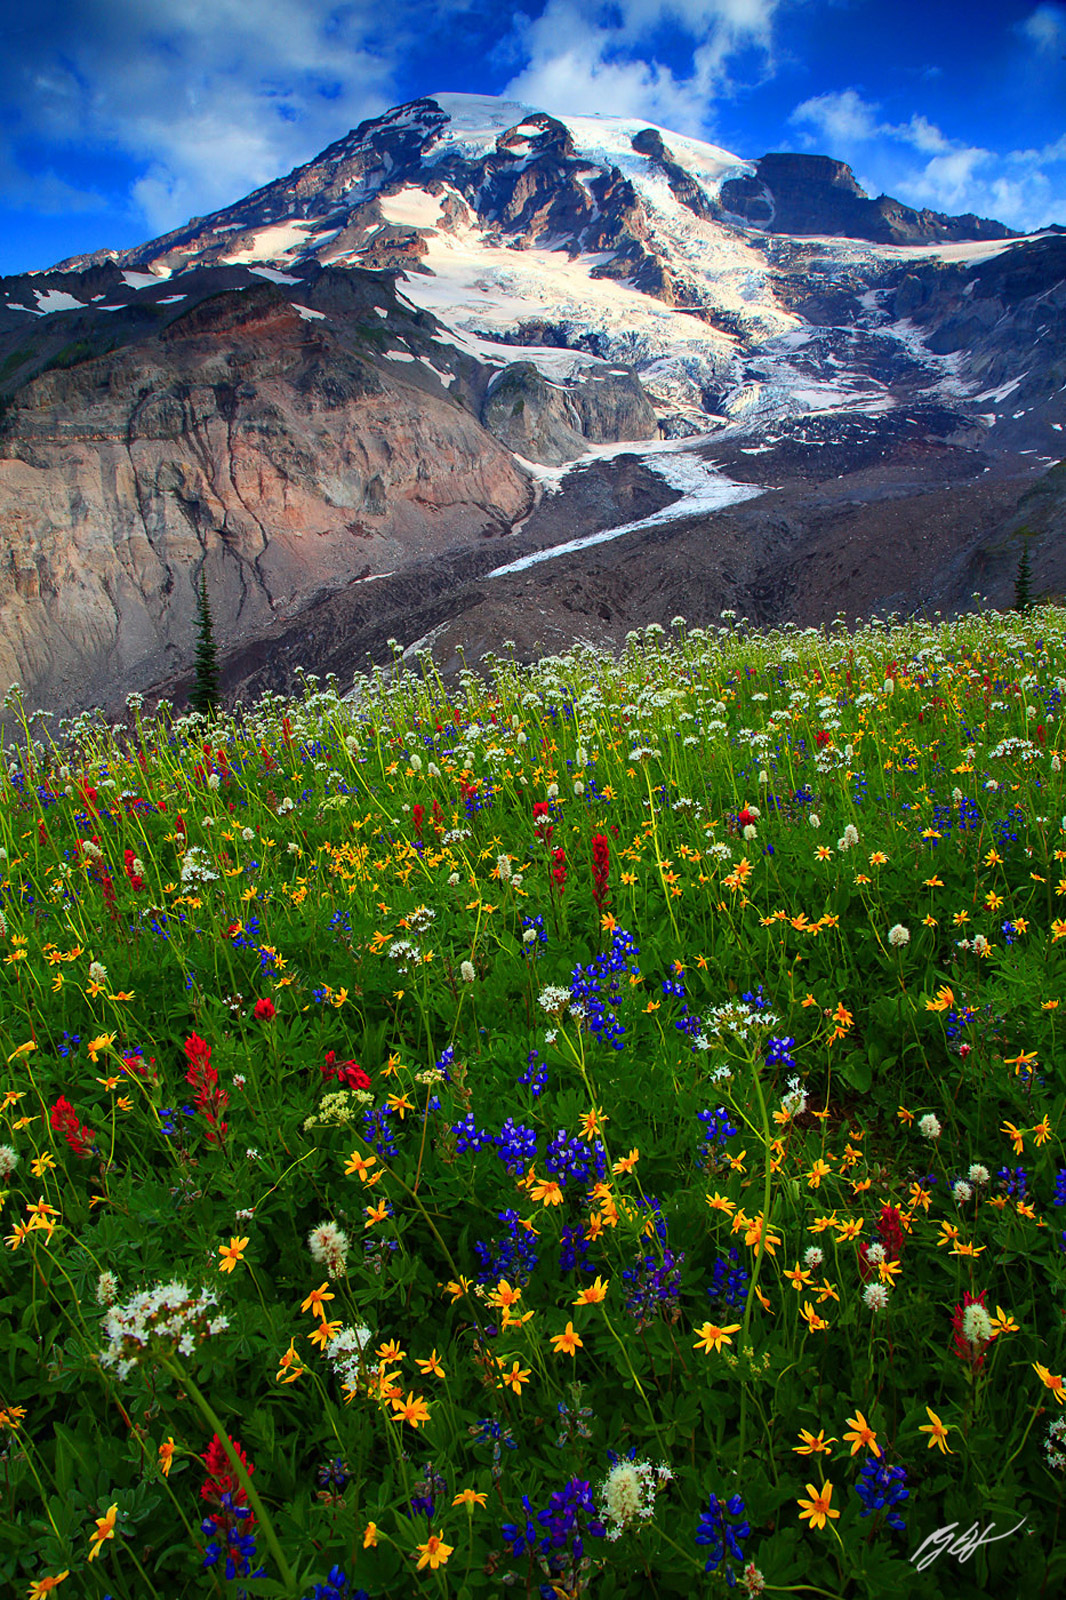 Wildflowers and Mt Rainier from Paradise Meadows in Mt Rainier National Park in Washington